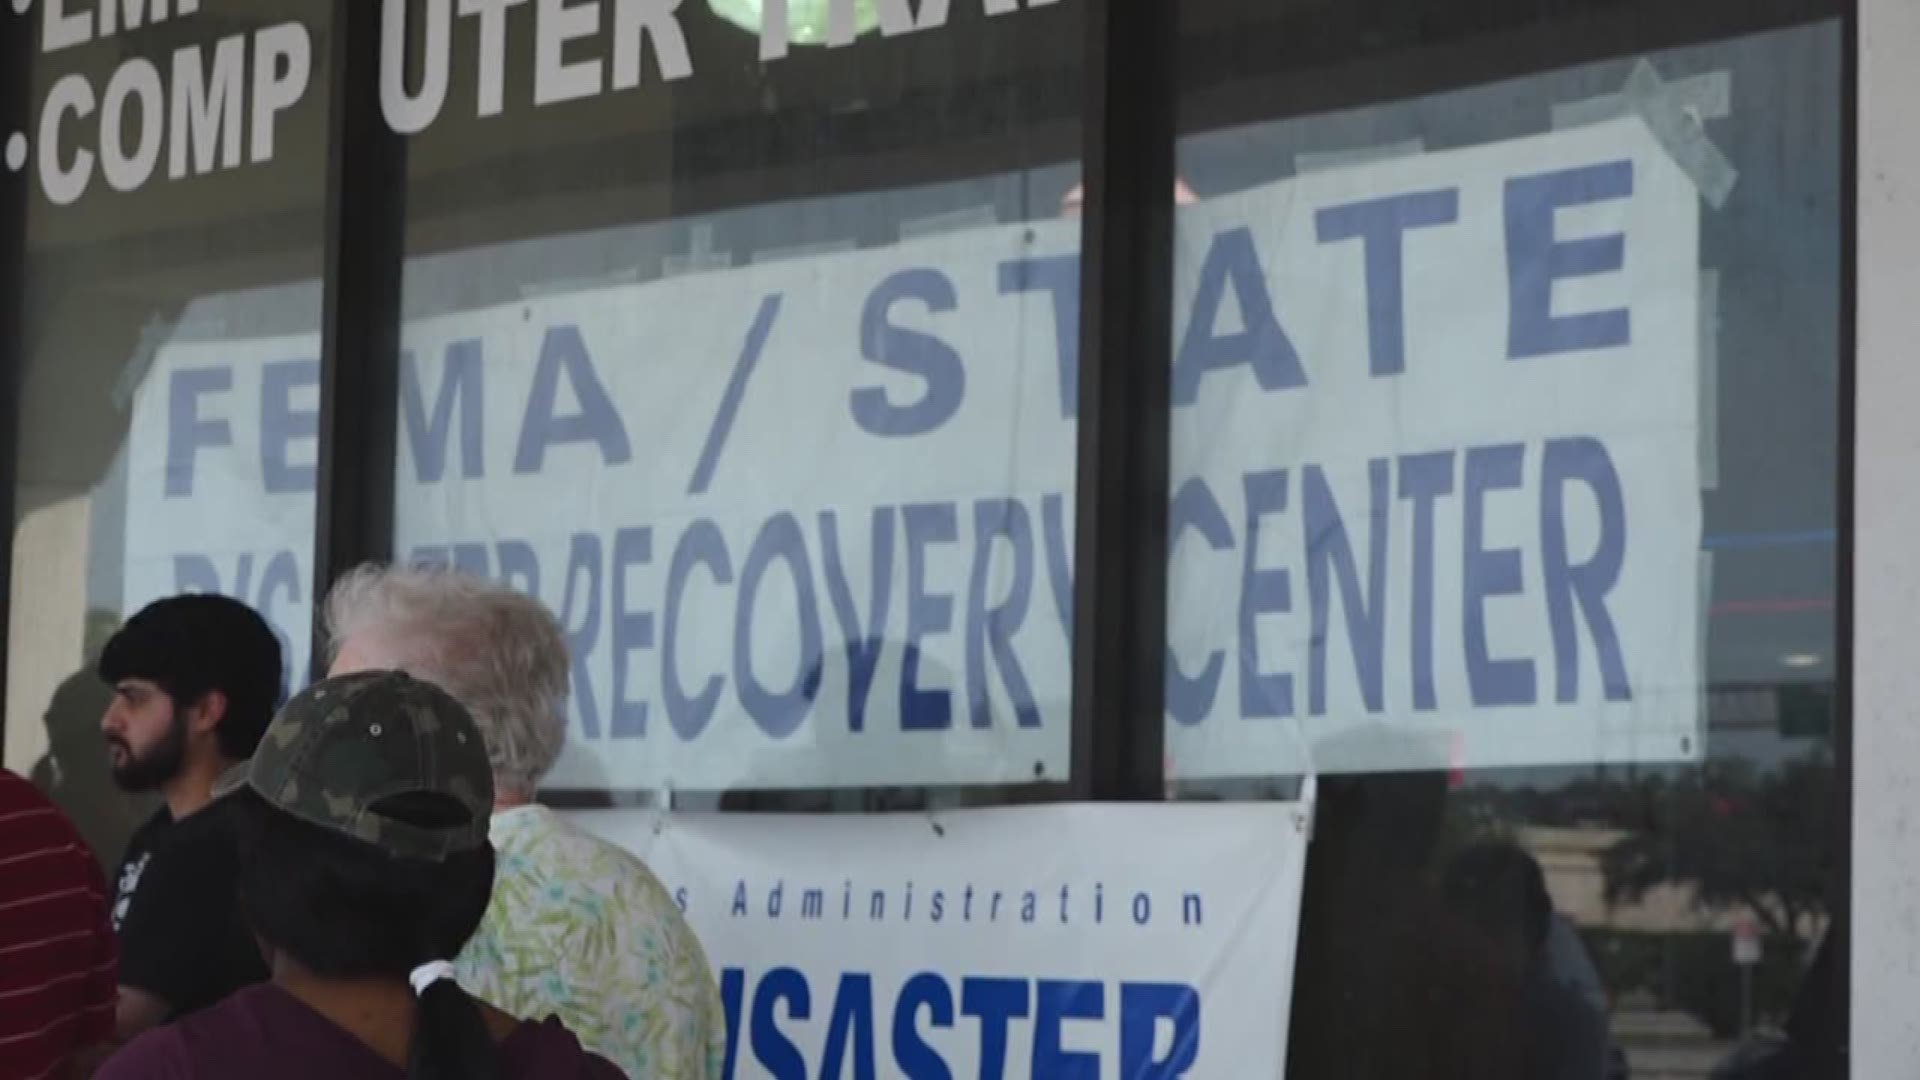 Hundreds showed up on Wednesday to the speak to FEMA representatives face to face at Disaster Recovery Center